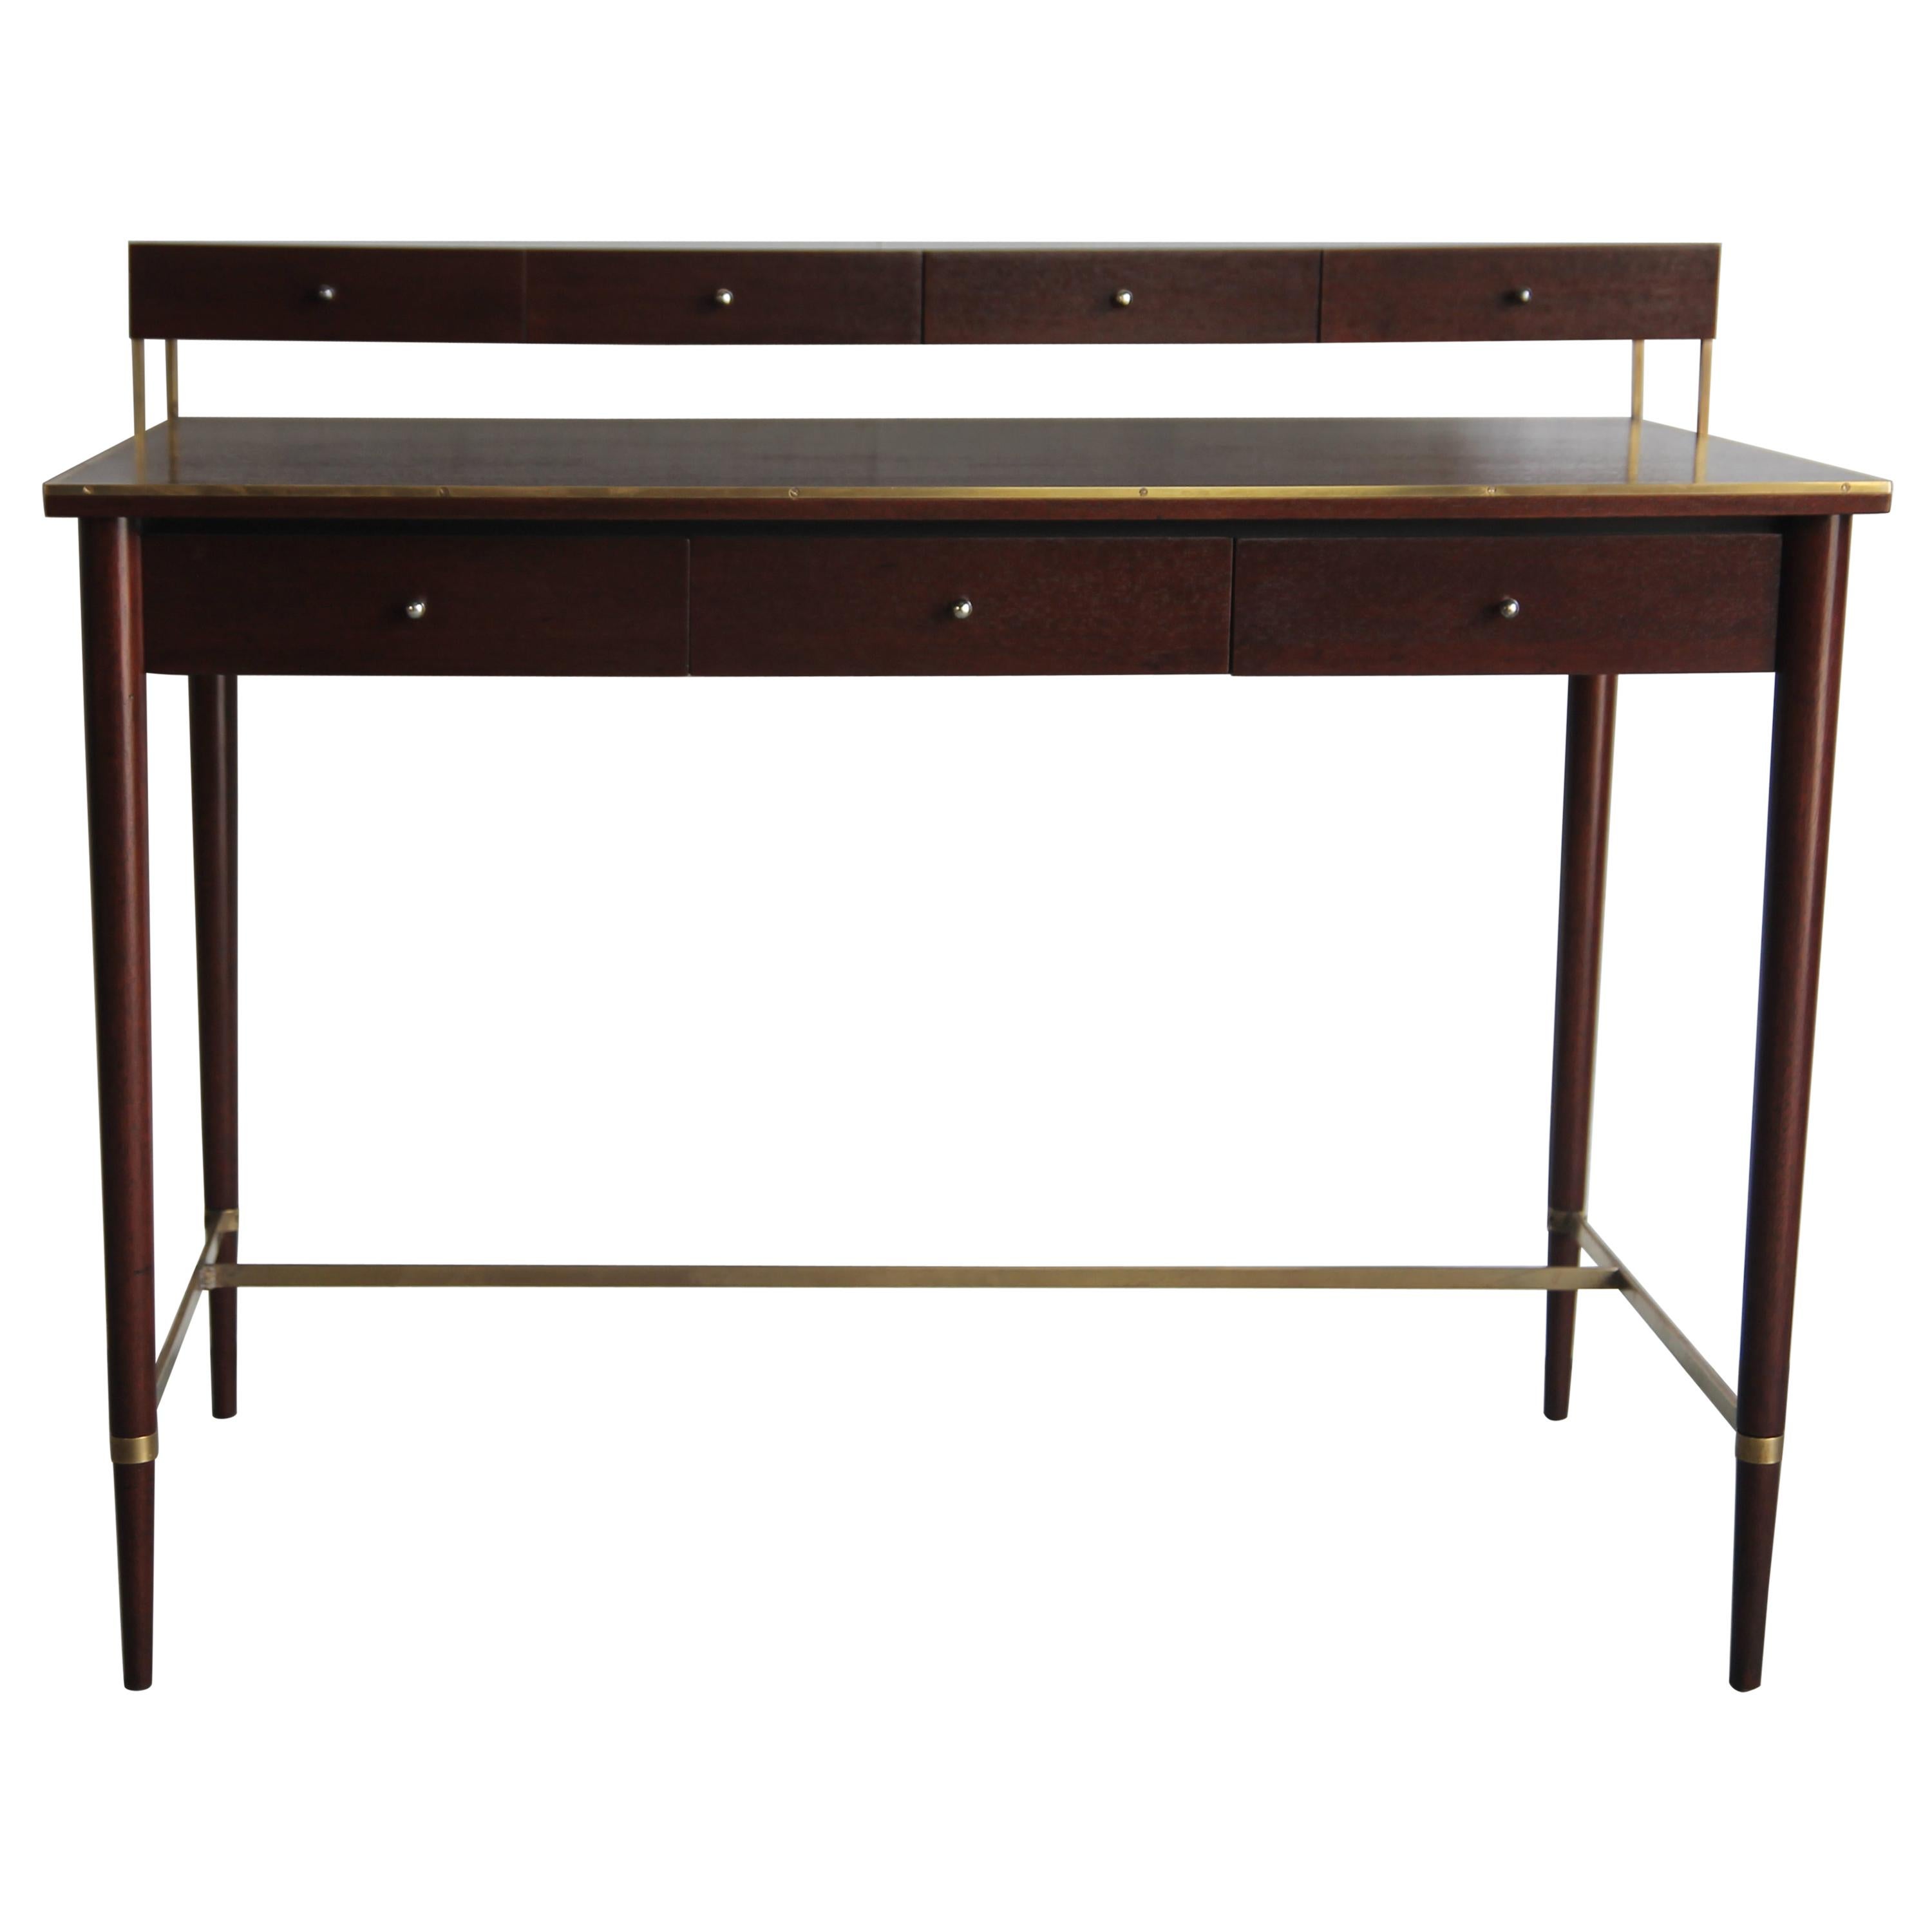 Rare Paul McCobb Writing Desk from the Connoisseur Collection